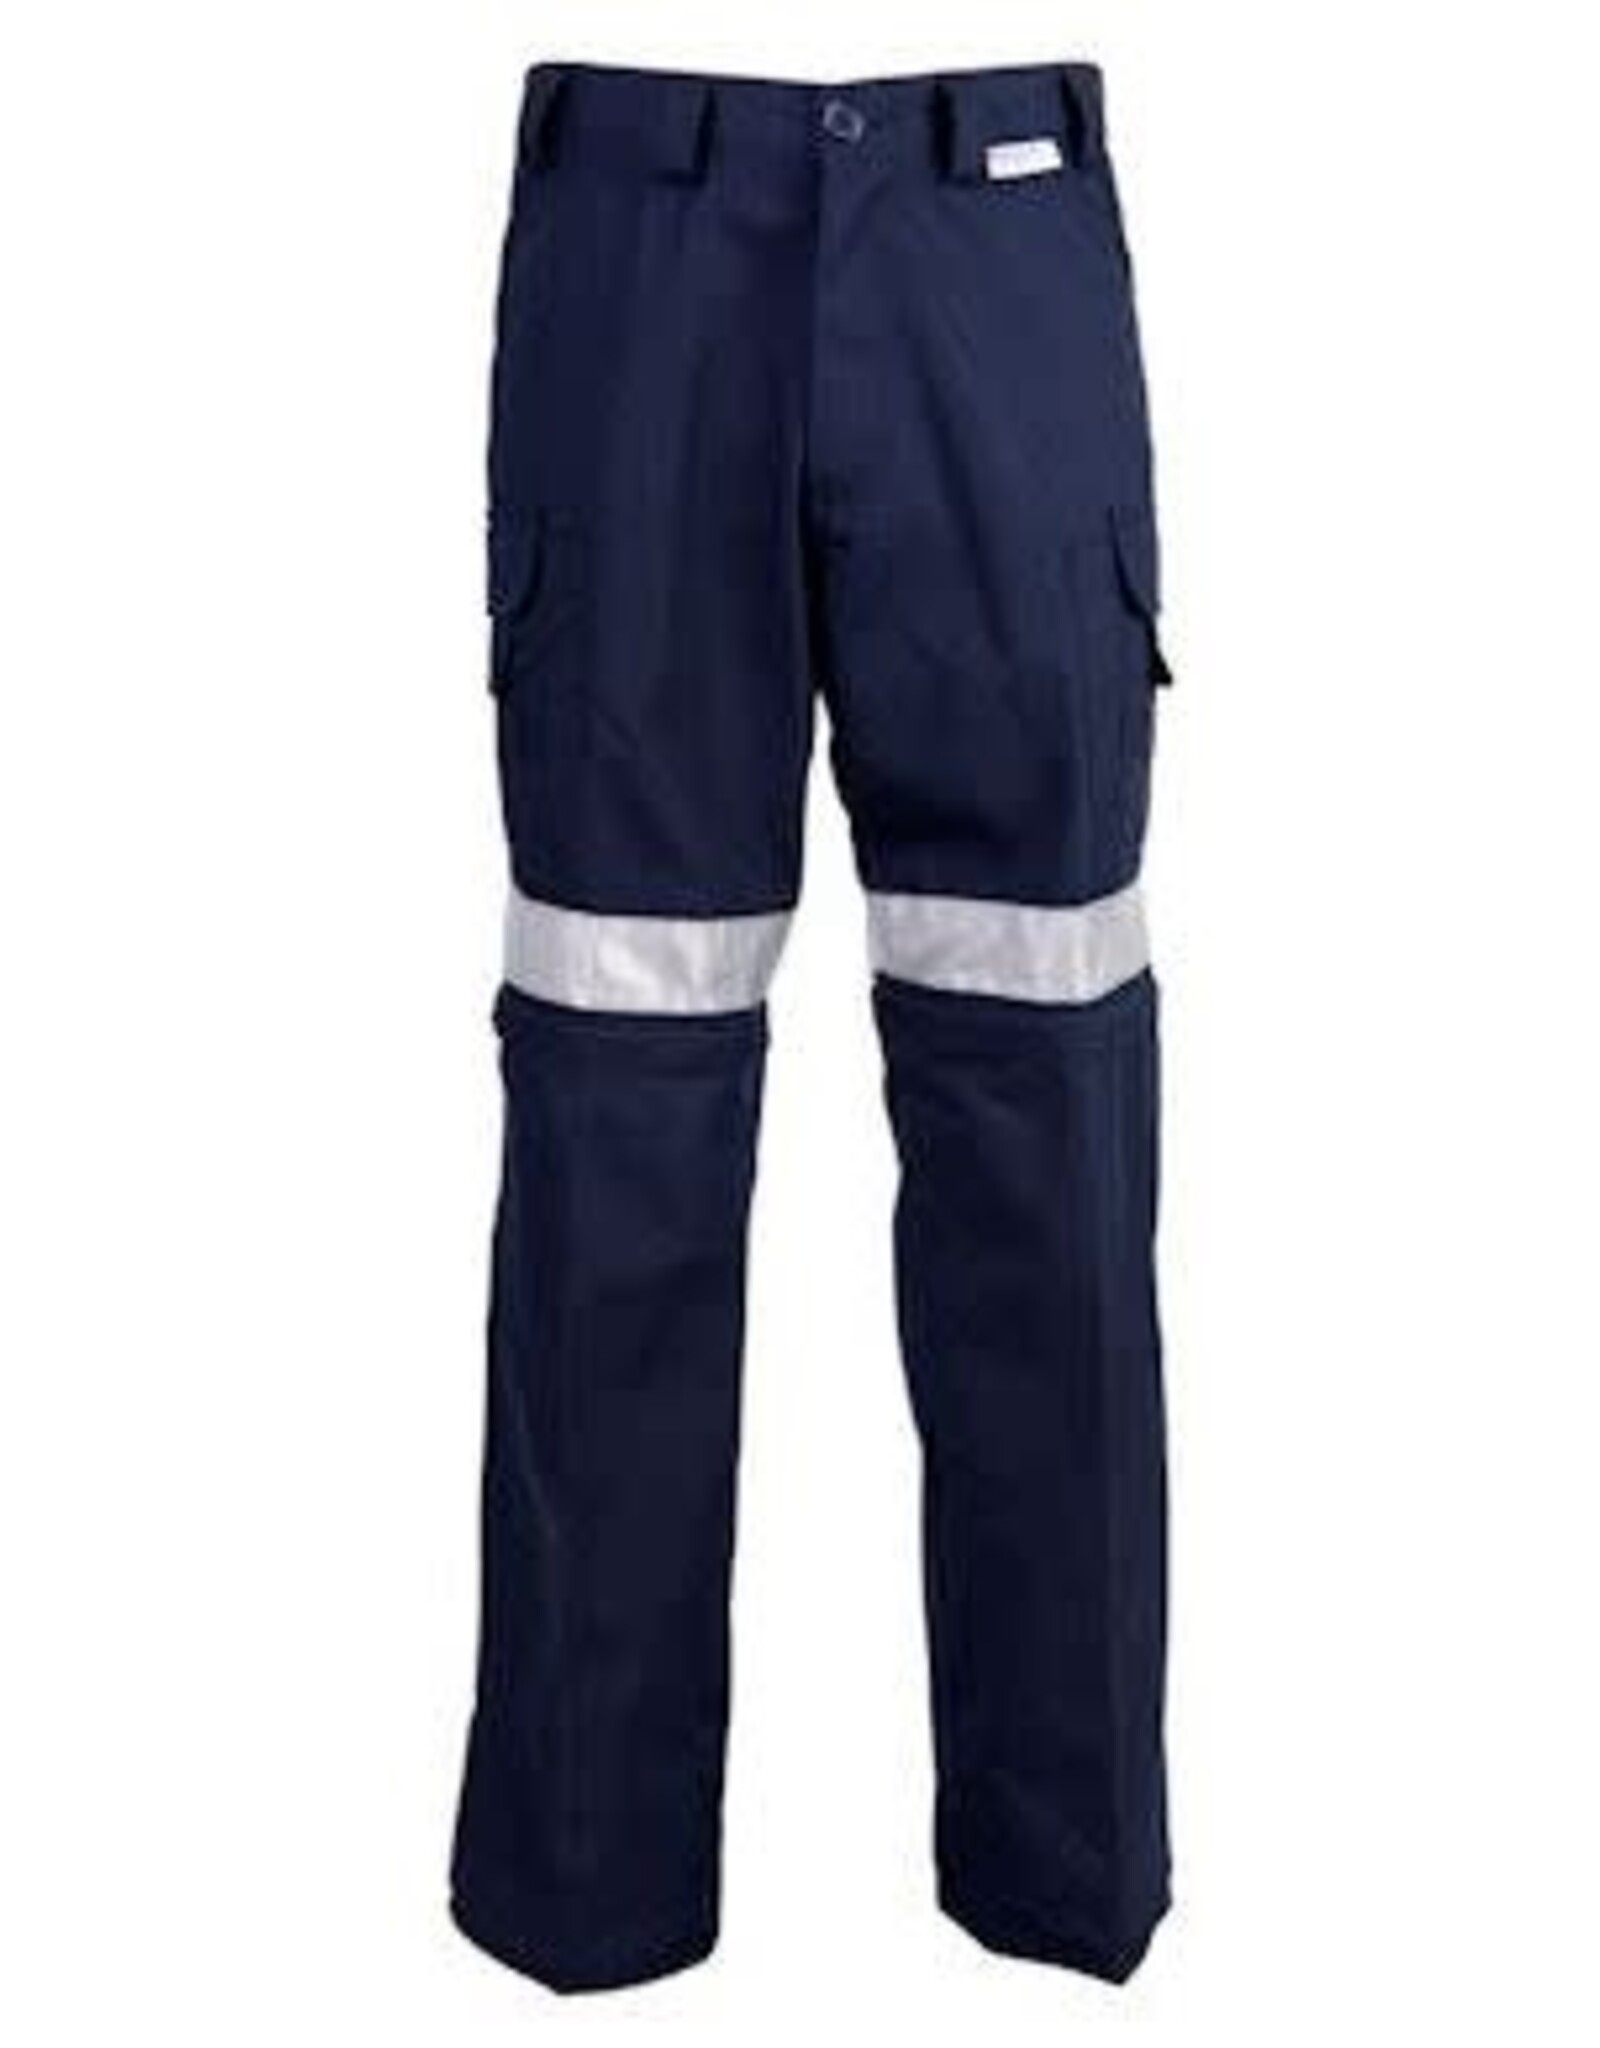 Coolworks Work Pants, Navy